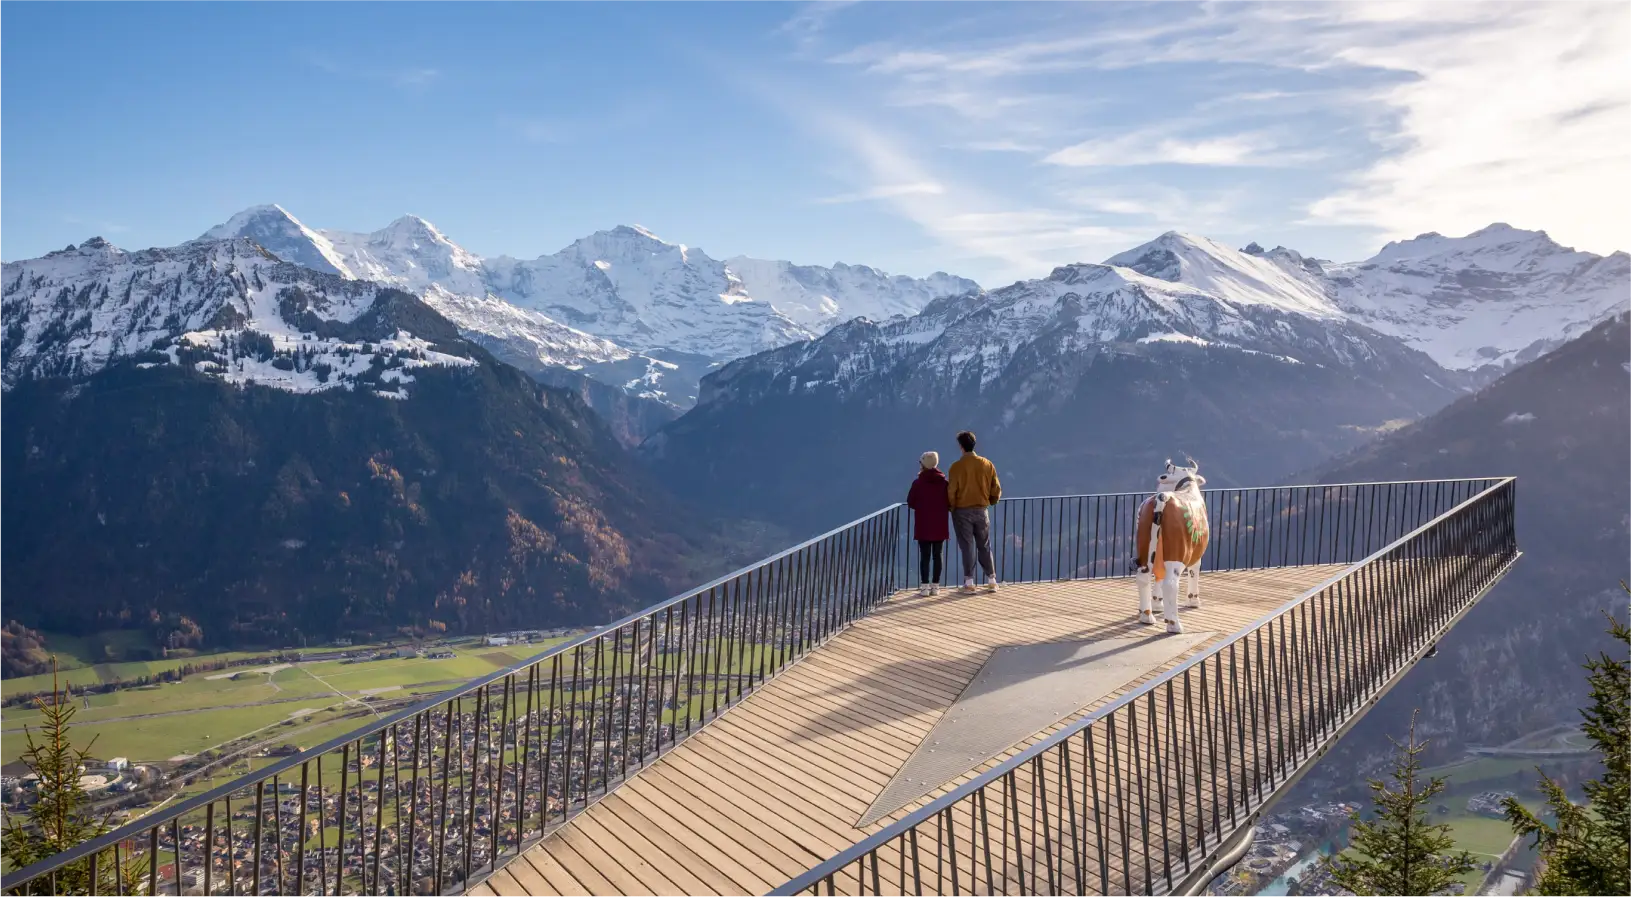 Harder Kulm is accessible with Swiss Travel Pass discount